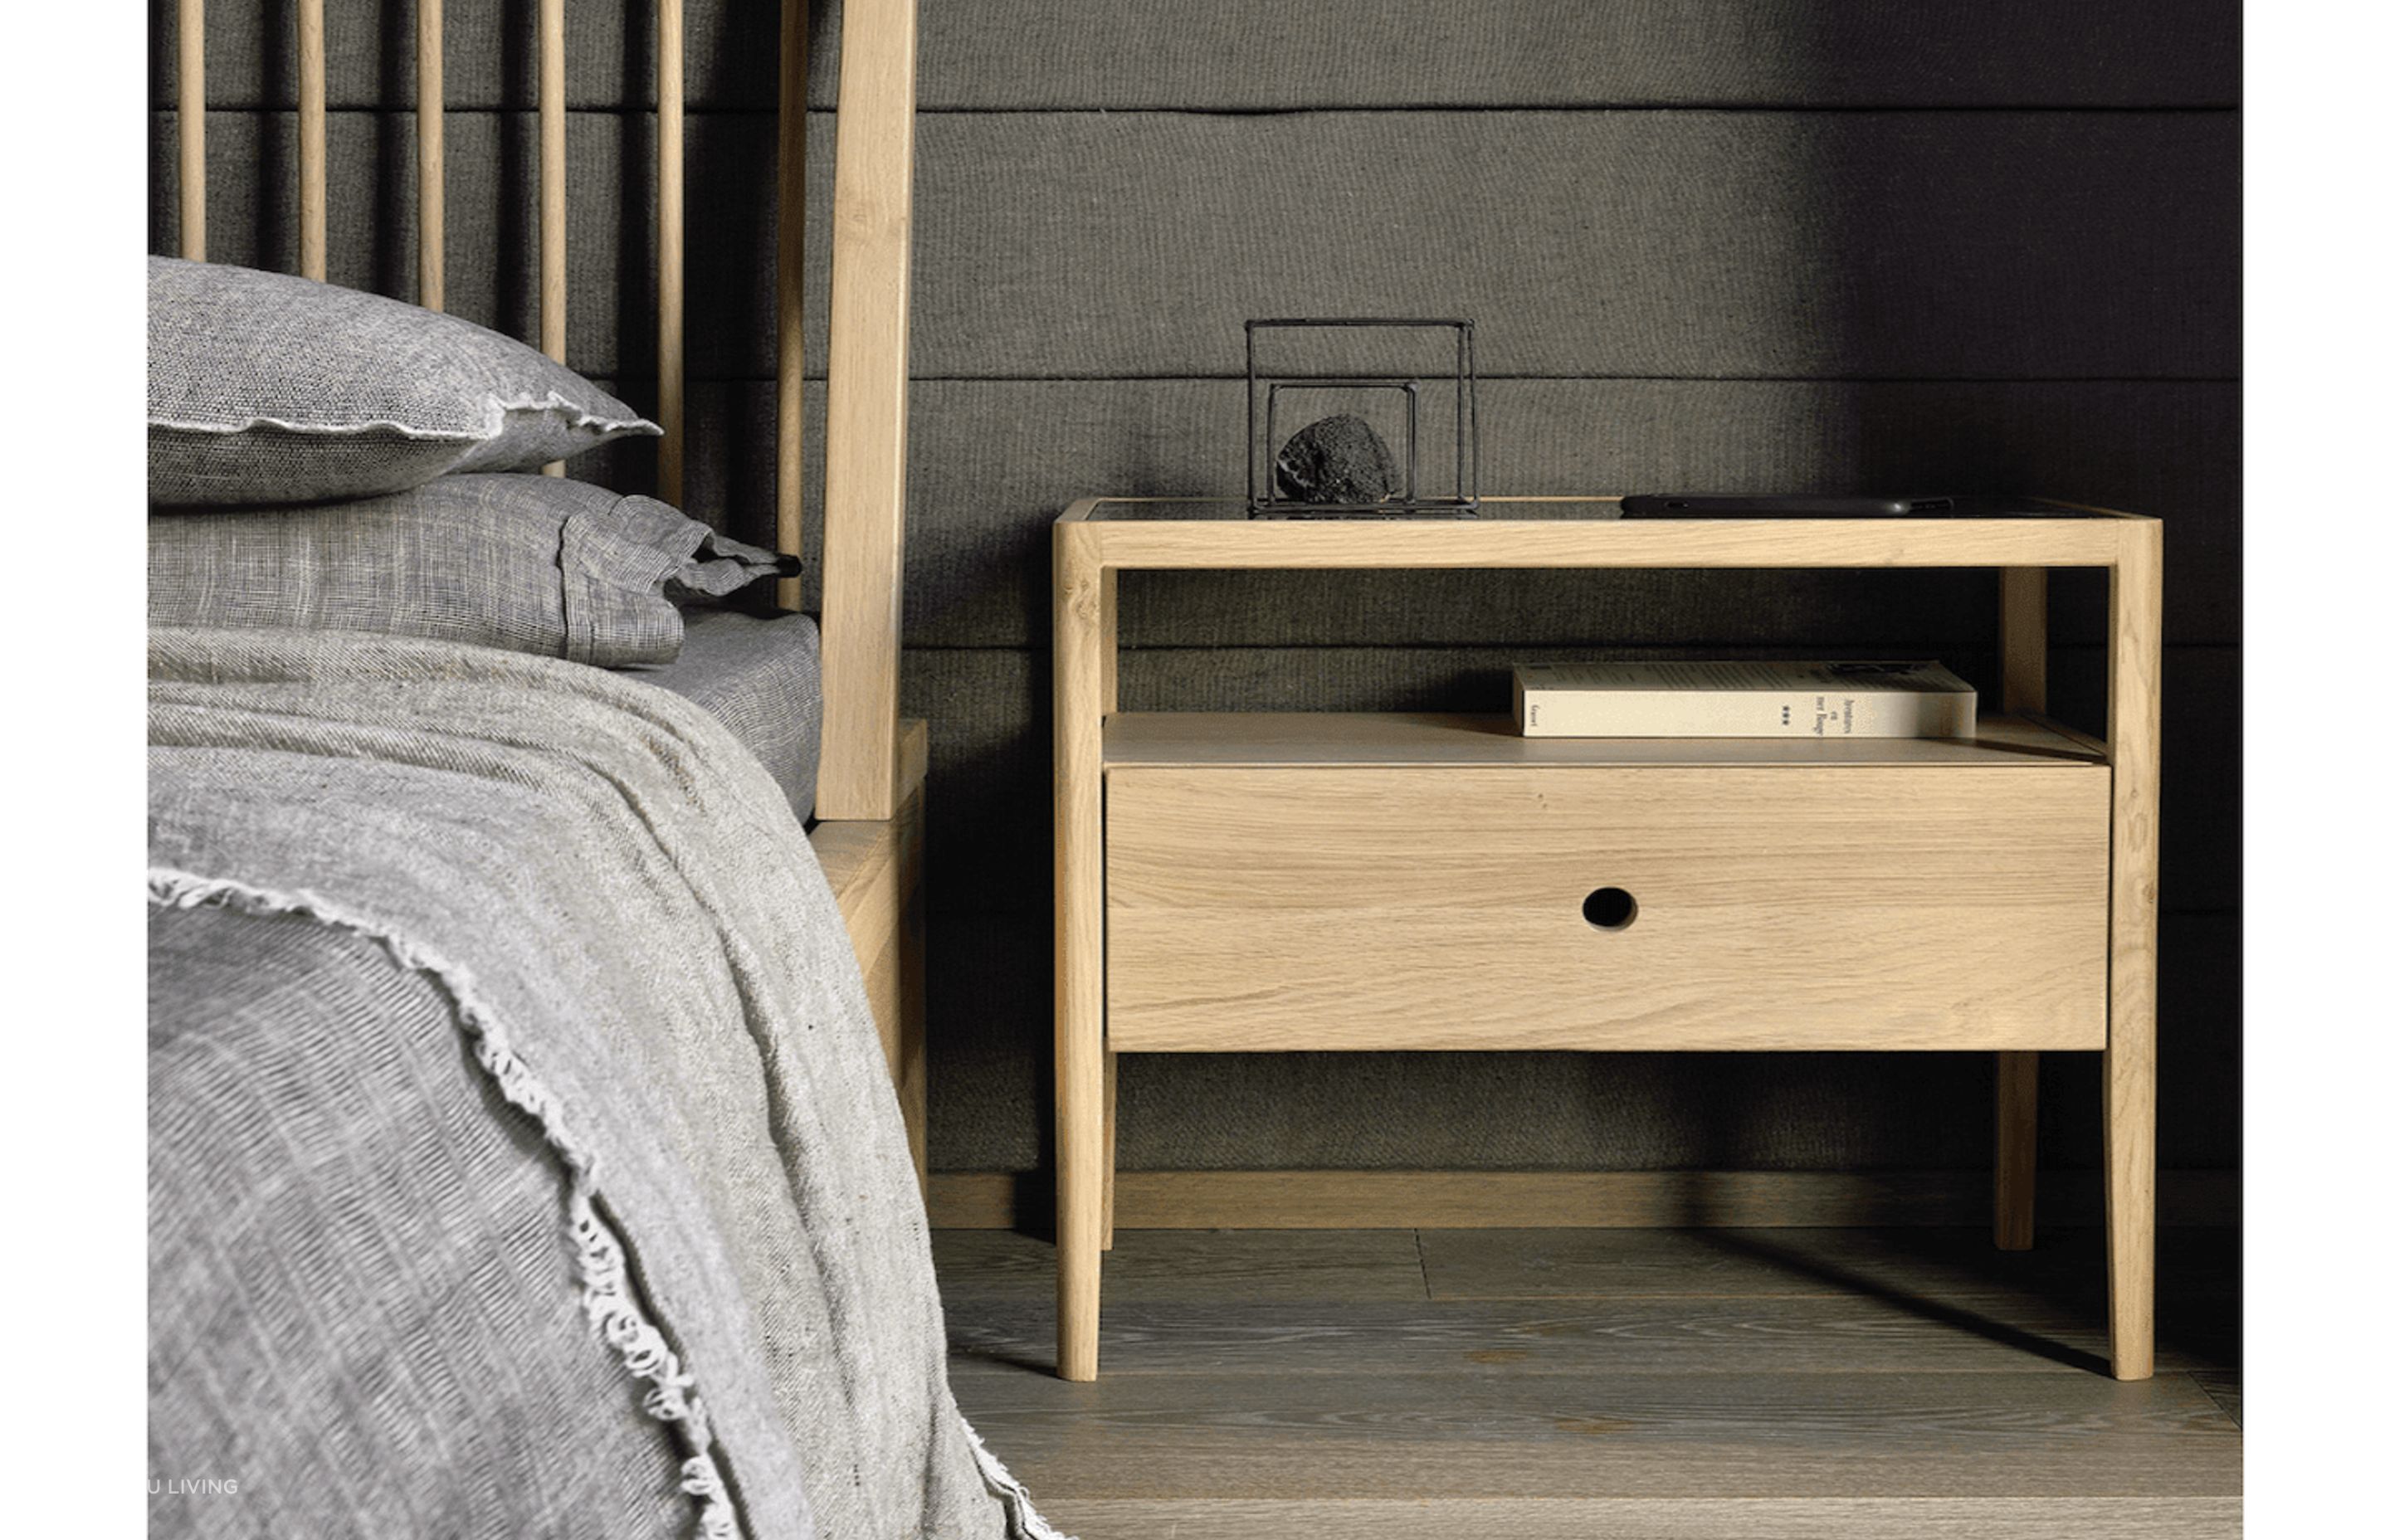 A bedside table with optimum bedside storage space can hold fun and practical household items. Featured product: Spindle Bedside Table.